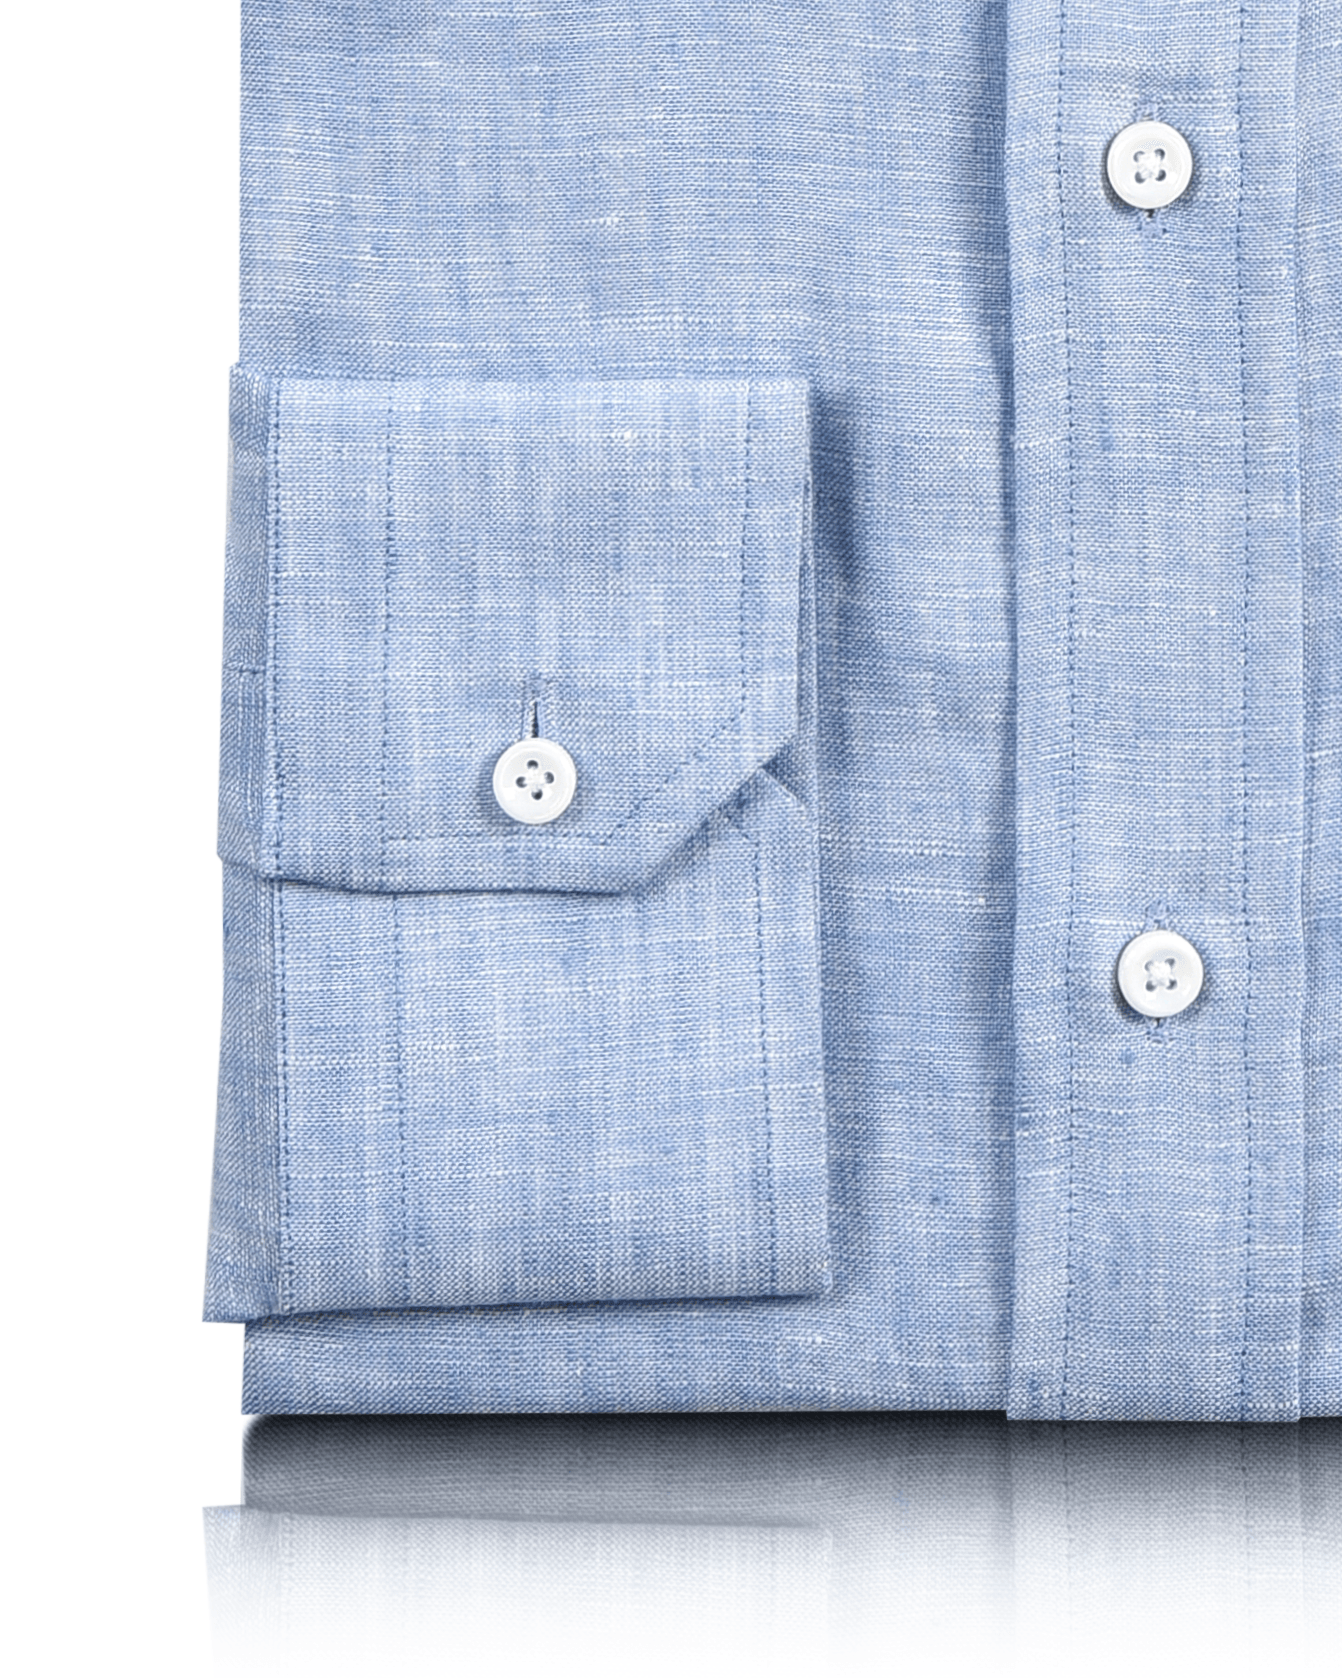 Cuff of the custom linen shirt for men in light blue chambray by Luxire Clothing